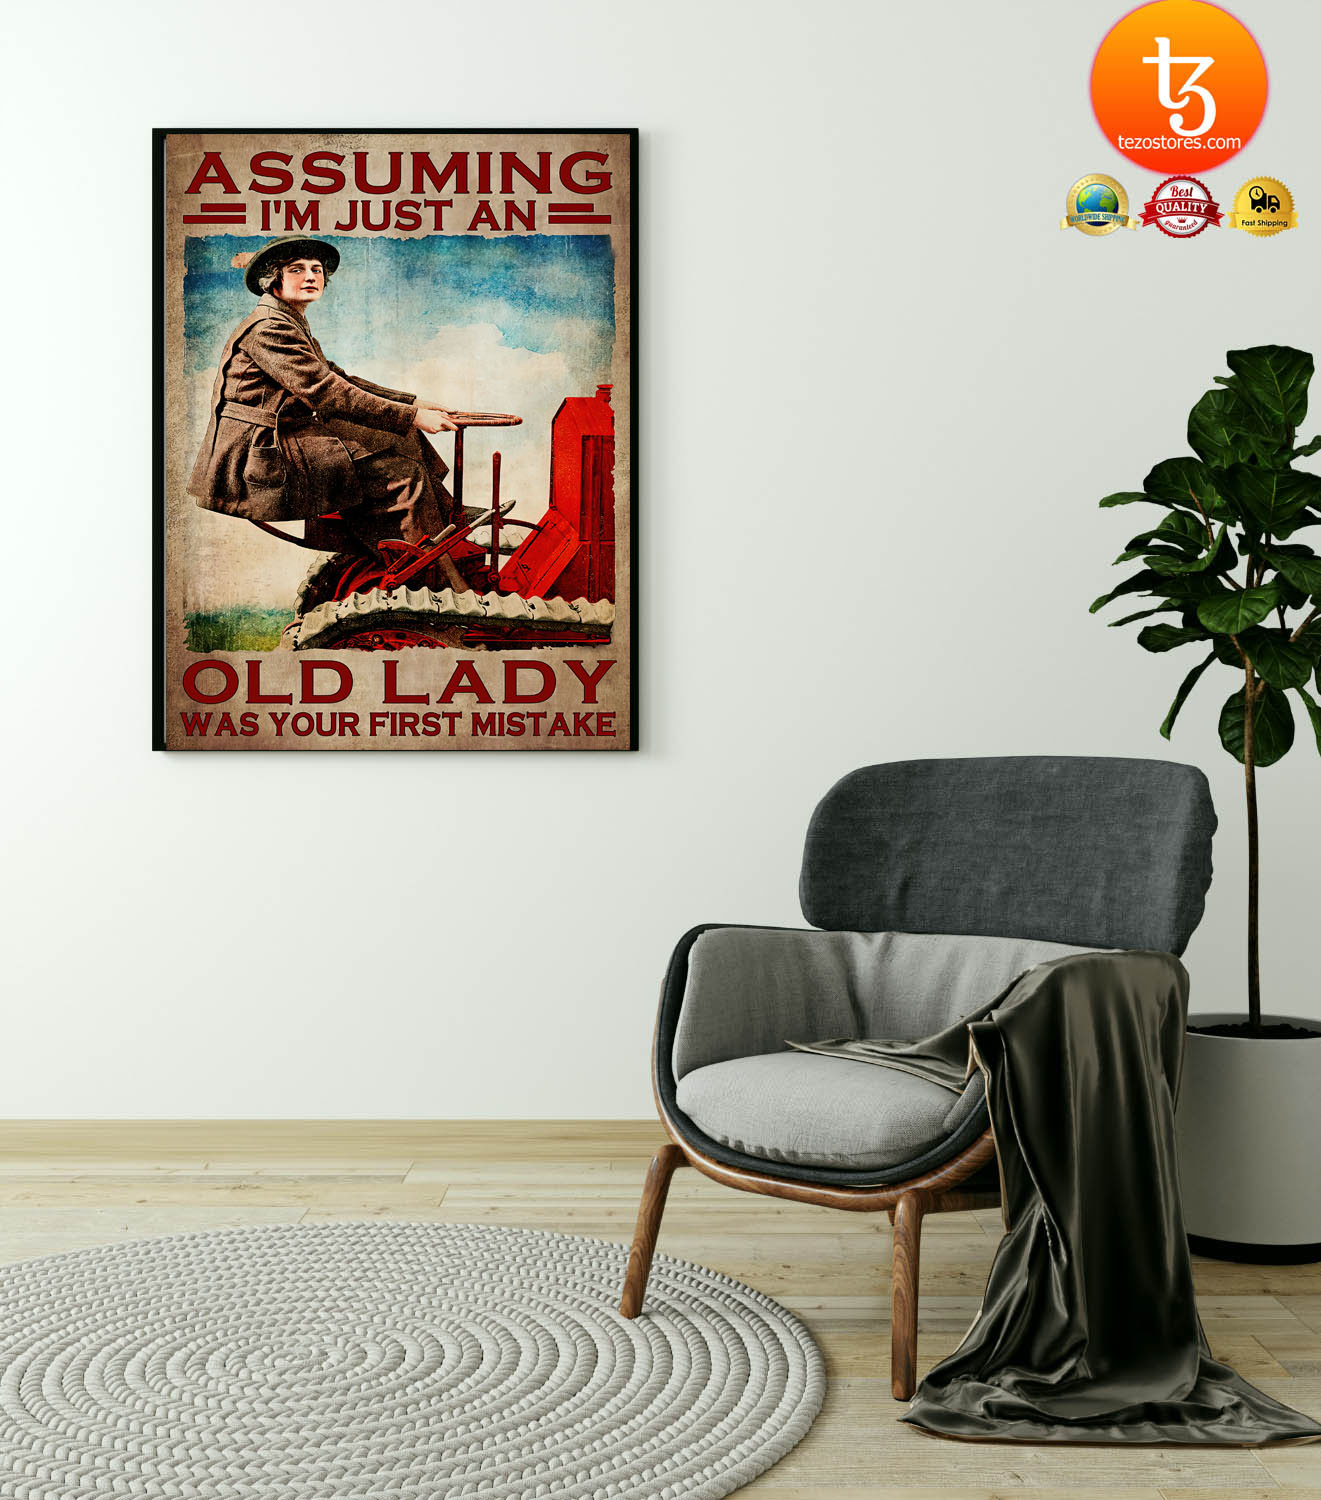 Assuming Im just an old lady was your first mistake poster1